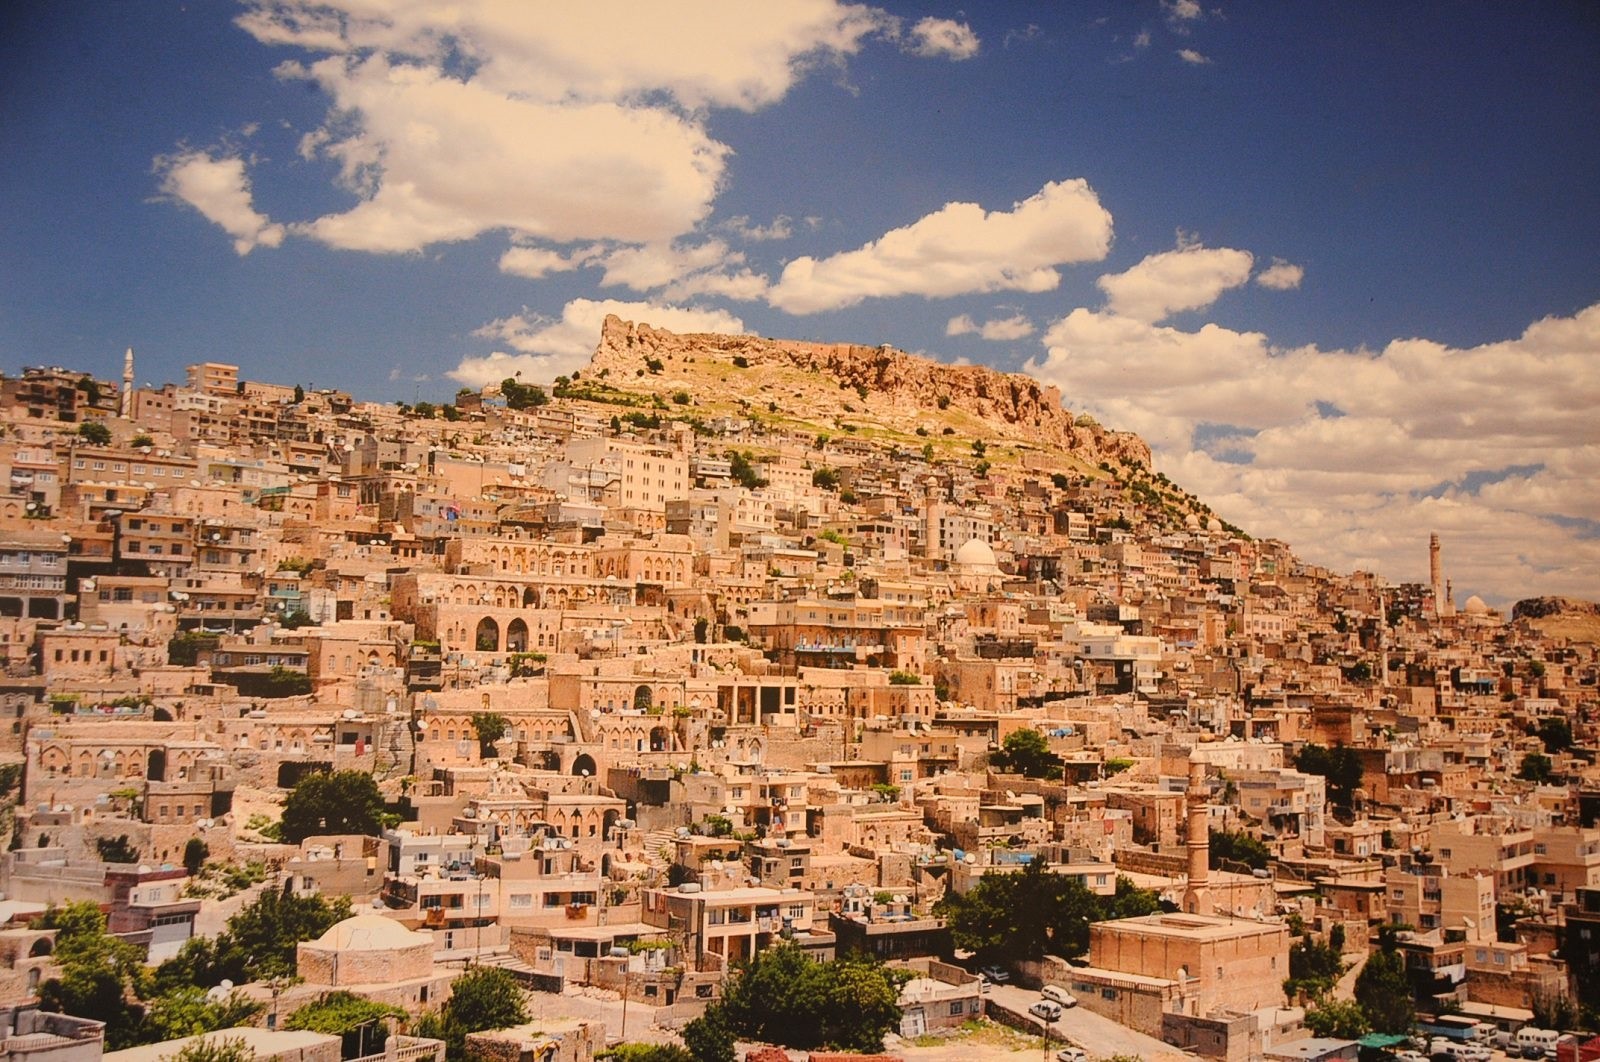 Situated on the outskirts of a hill crowned with an old castle, Mardin is known for its unique architecture composed of golden-colored houses.